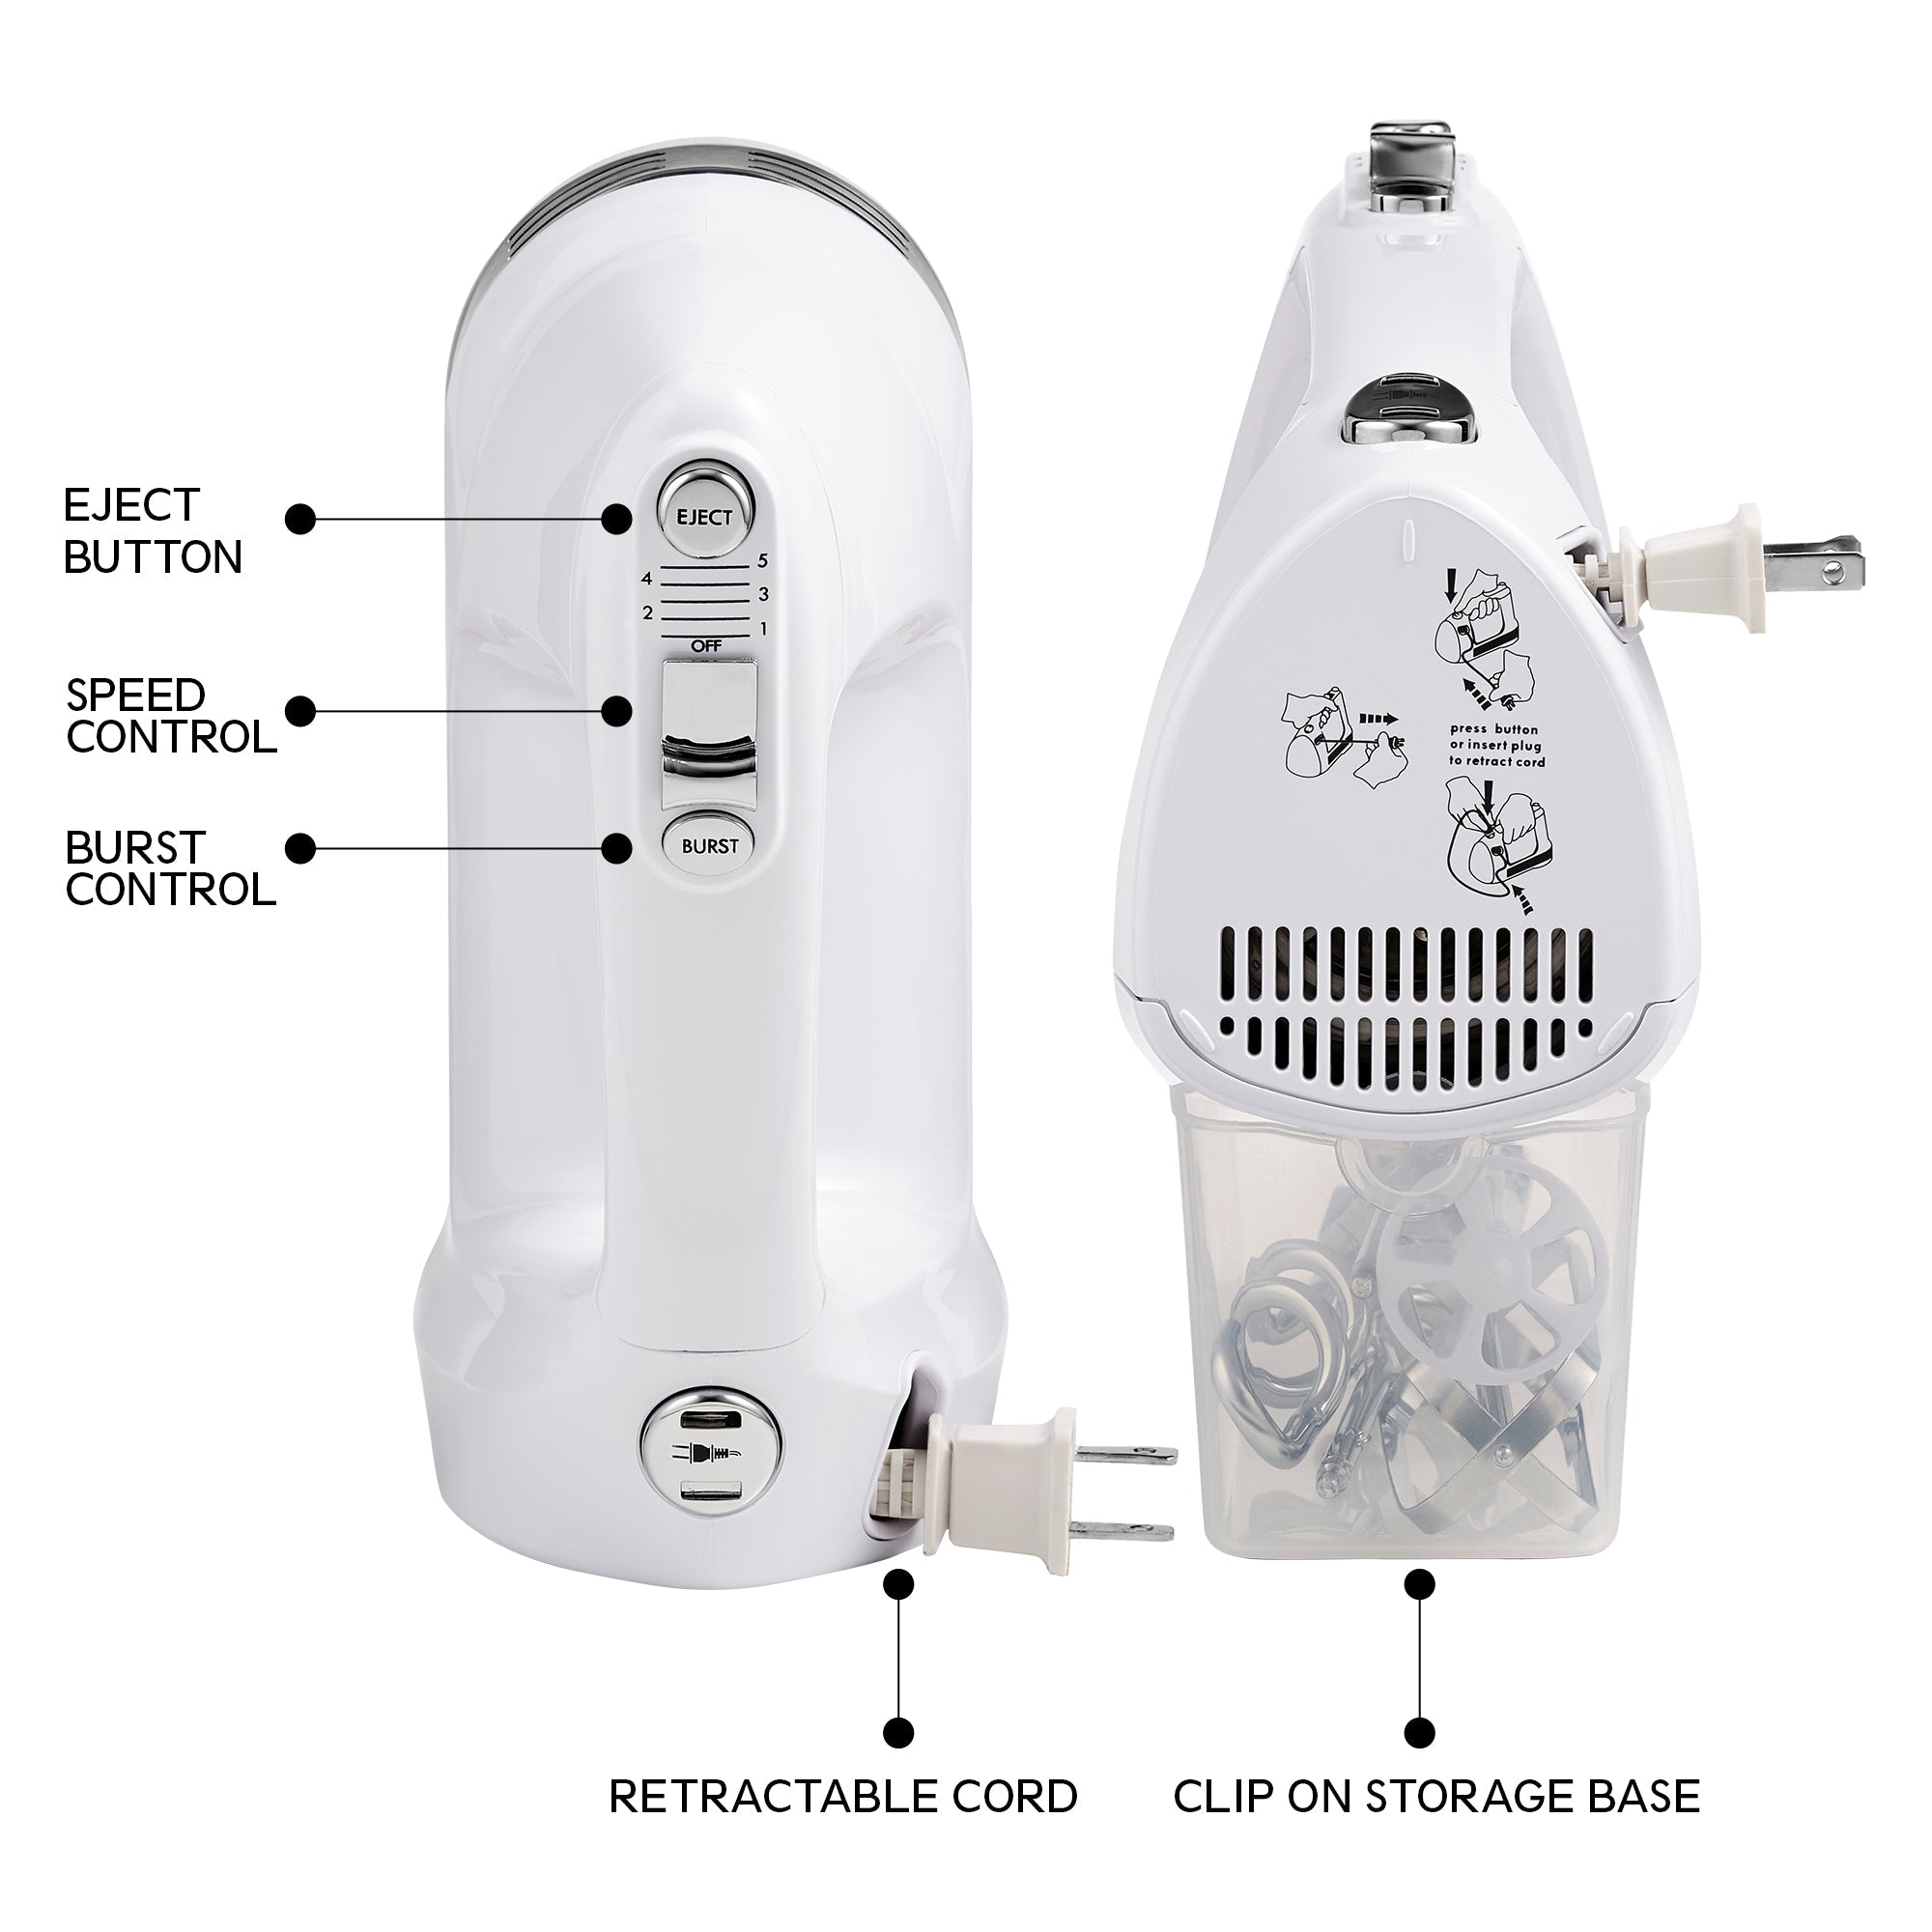 Top and side views of the Kenmore 250 watt 5-speed kitchen mixer with parts and controls labeled: Eject button; speed control; burst control; retractable cord; and clip on storage base